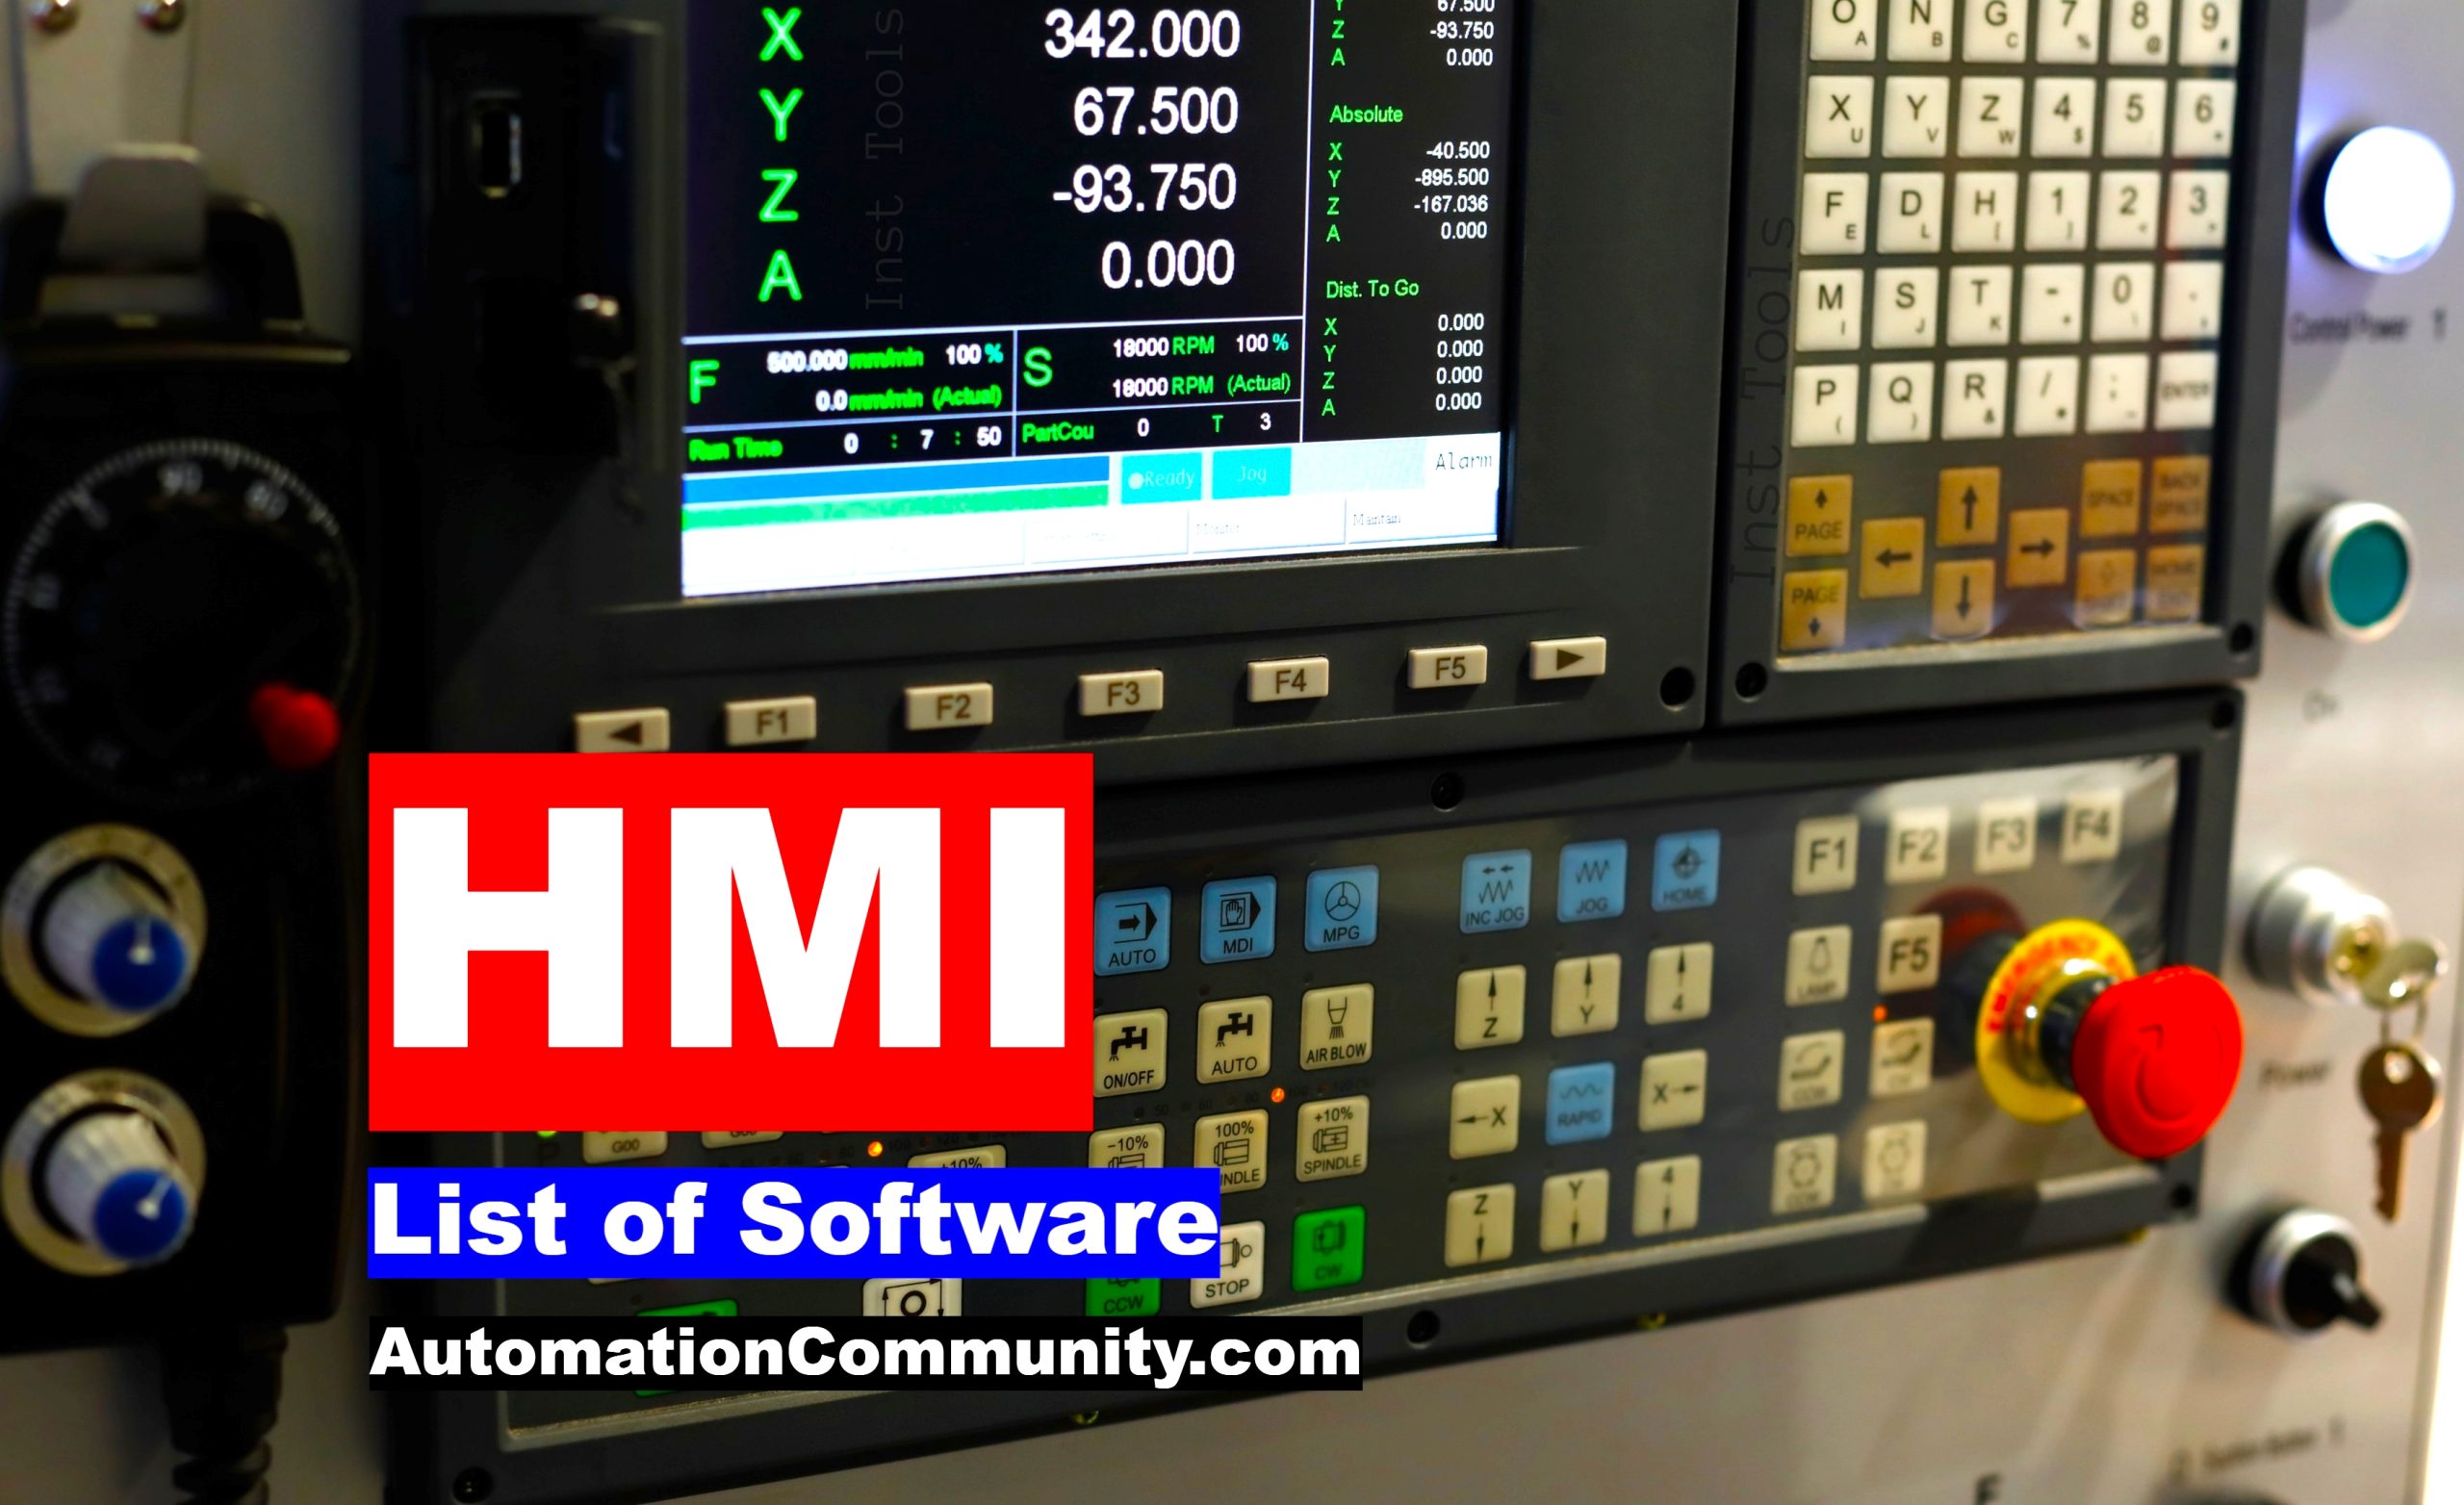 Top HMI Software List for Industrial Automation